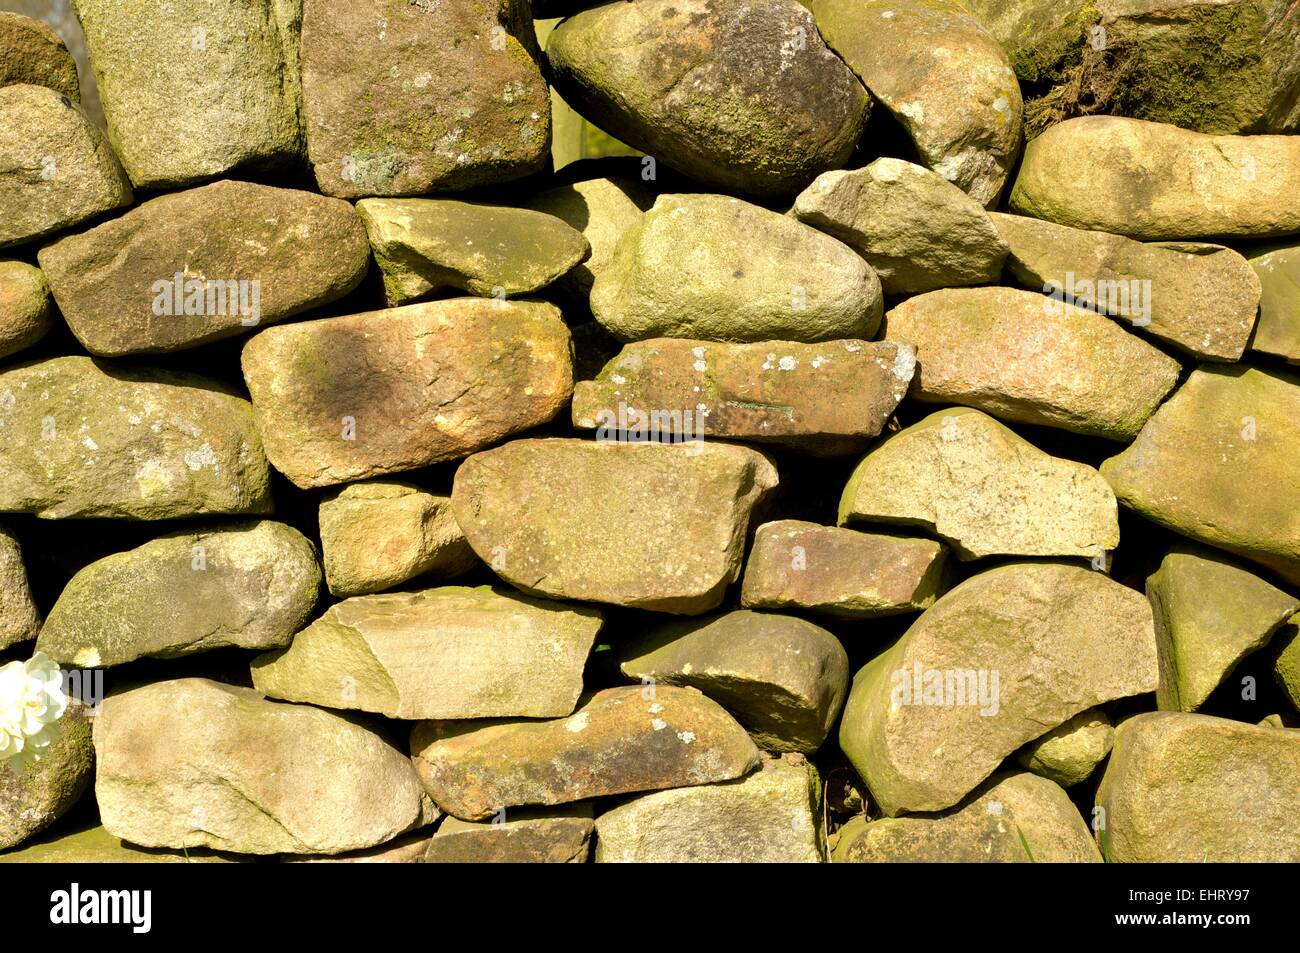 Traditional stone walling close up in the United Kingdom showing texture and irregular shapes Stock Photo